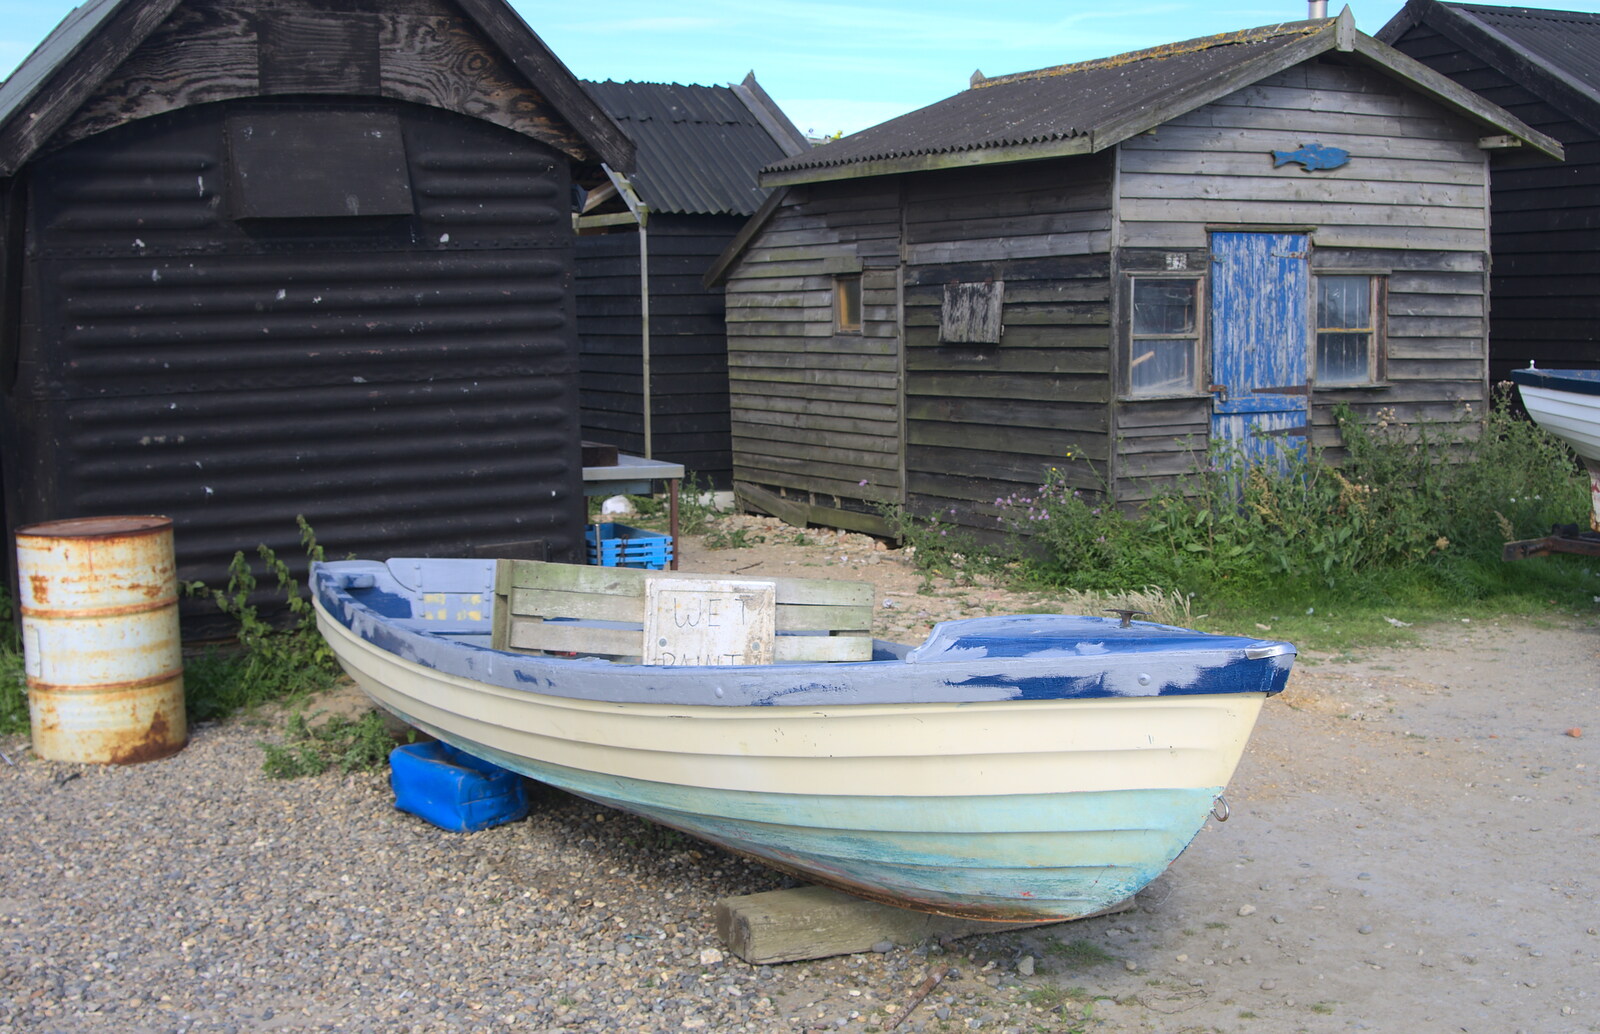 A fishing boat is being repainted from A Short Trip to Southwold, Suffolk - 24th July 2016